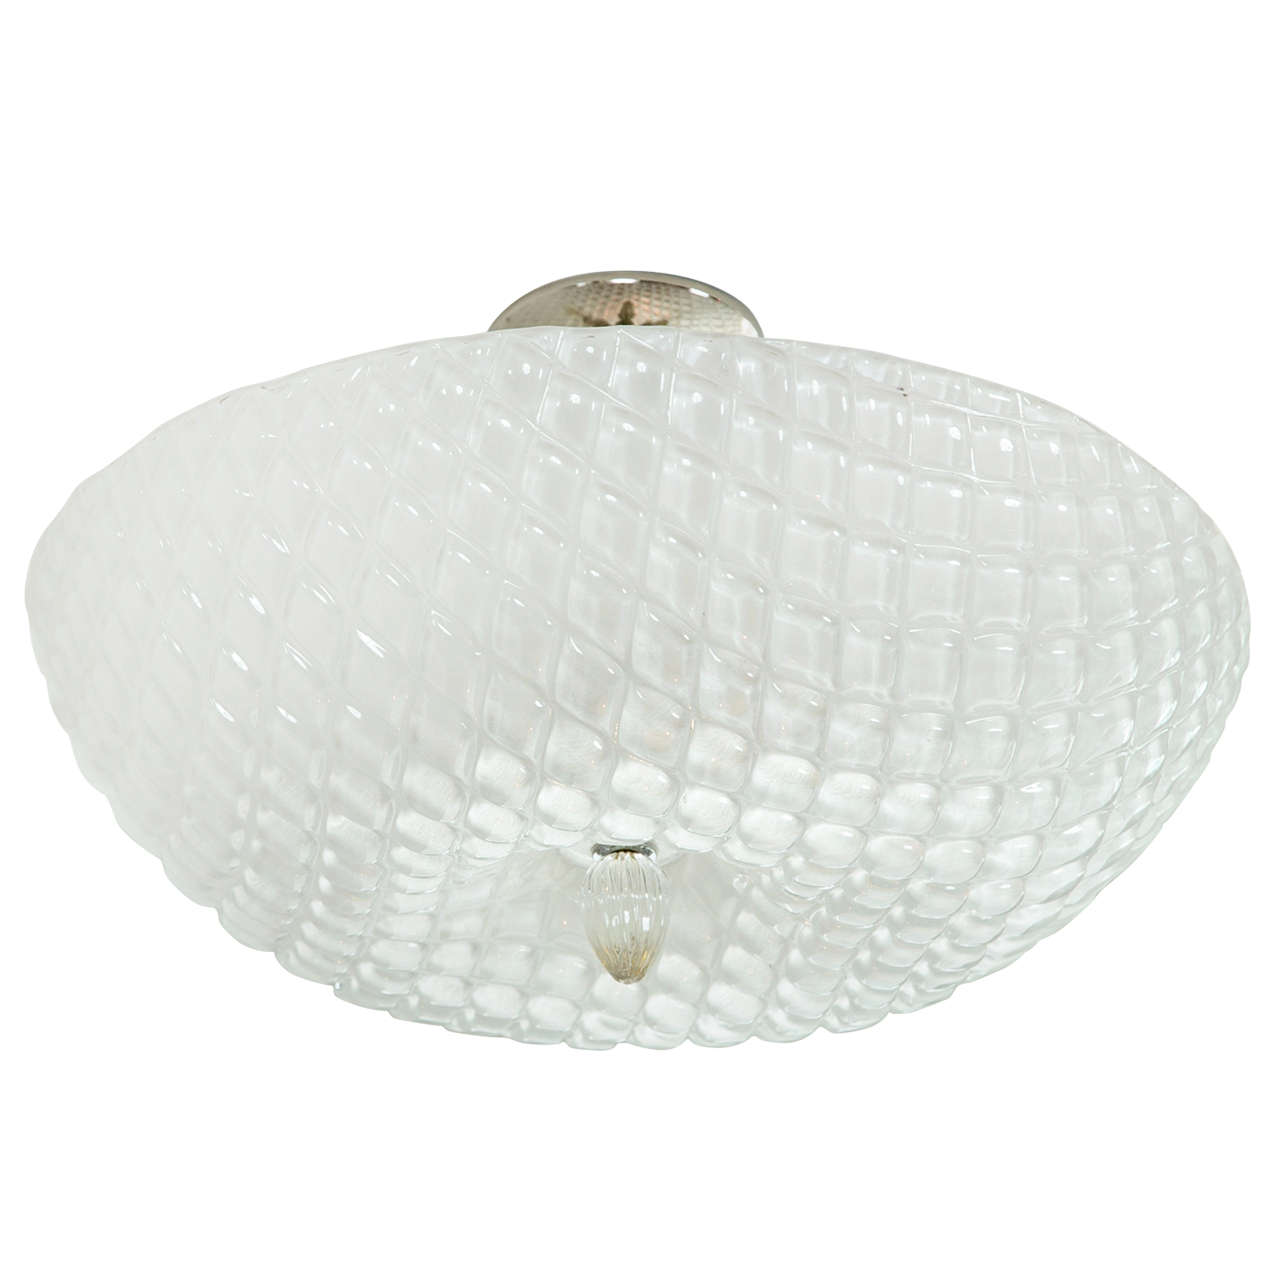 Shimmery Murano Ceiling Fixture or Pendant